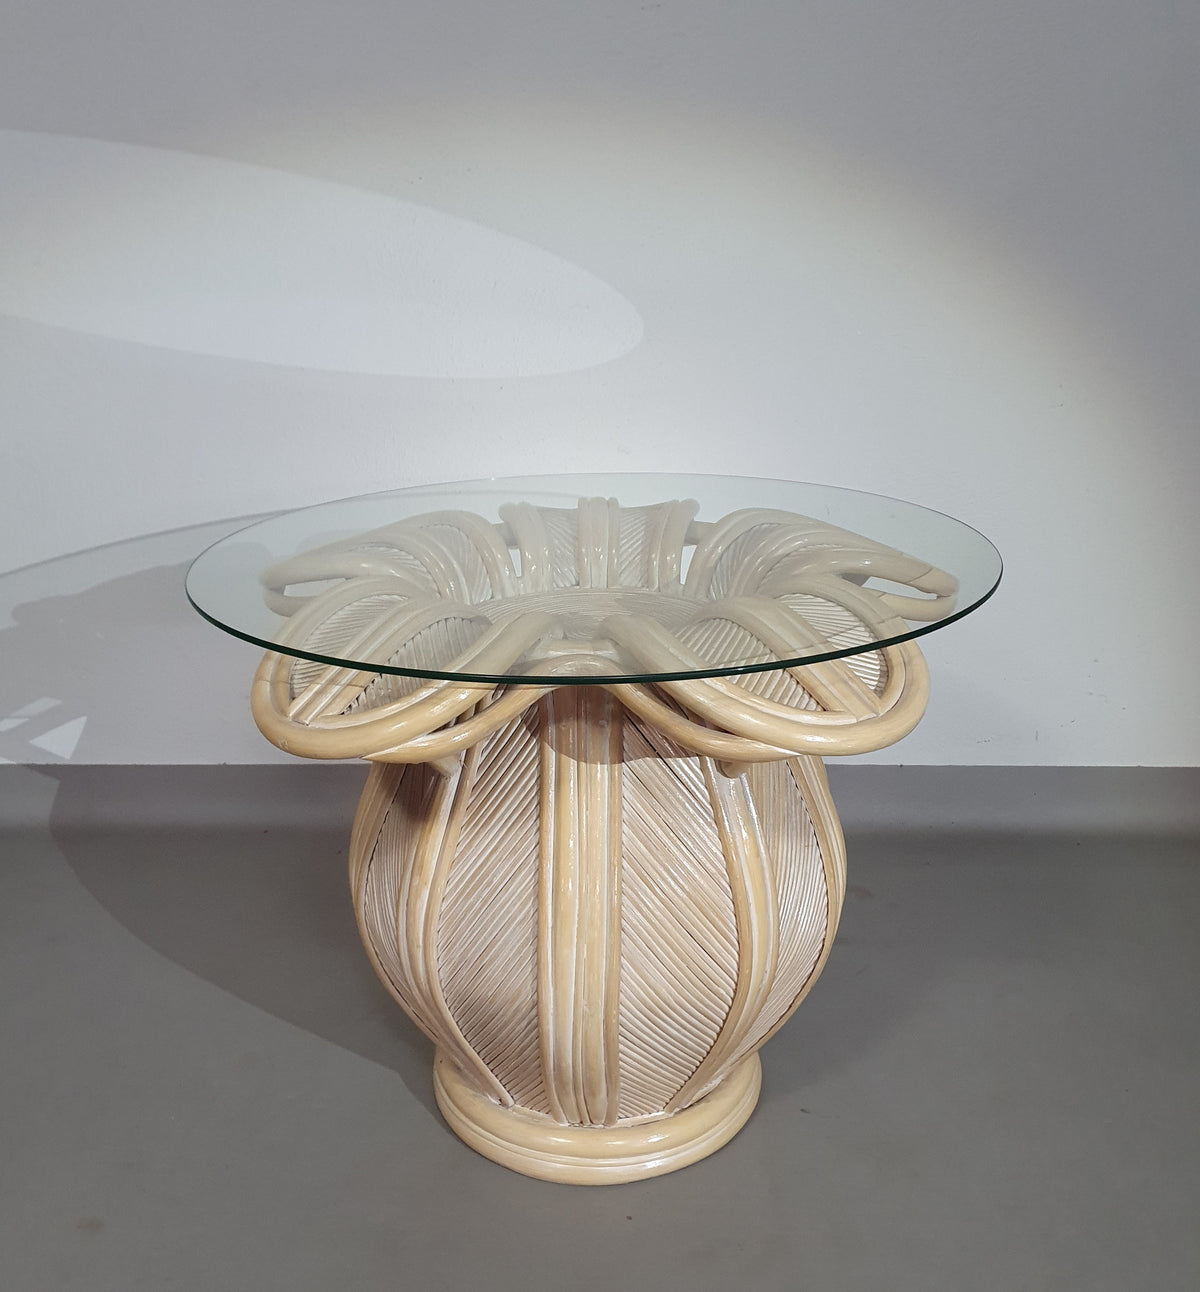 Split reed / pencil reed / rattan / bamboo bell flower side table.